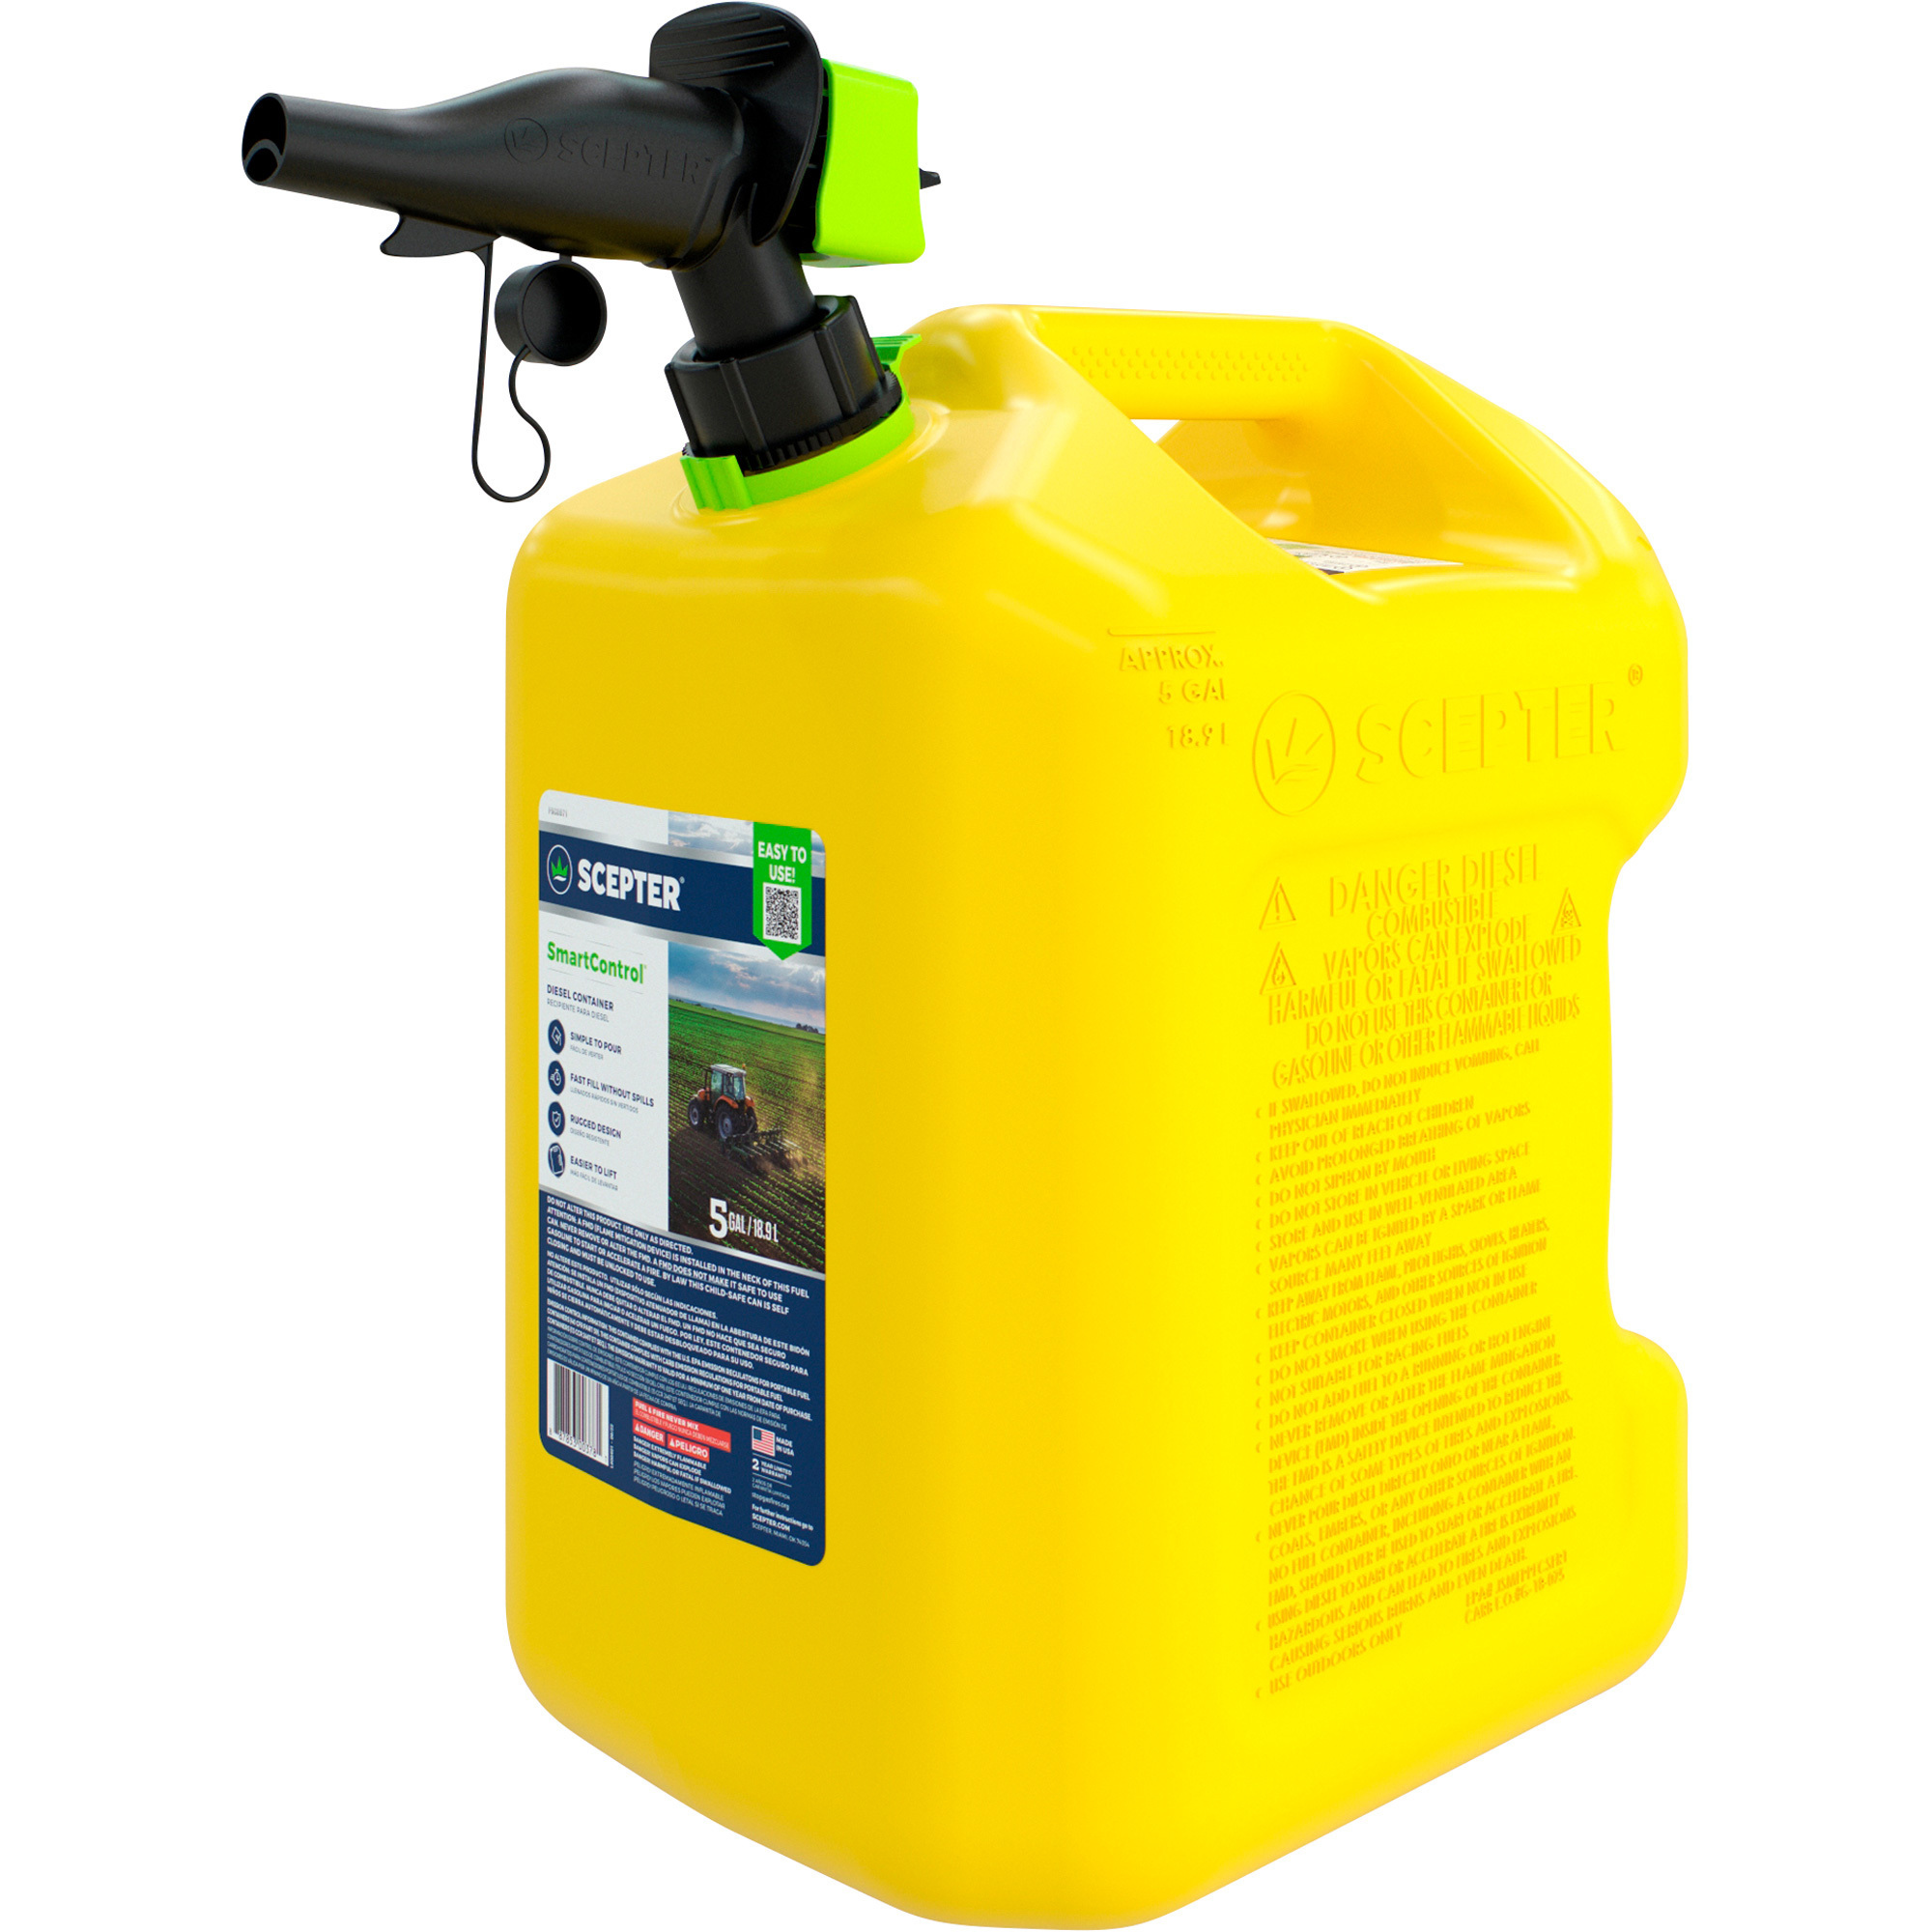 Scepter Diesel Fuel Can with SmartControl Spout, 5 Gallons, Yellow, Model FSCD571